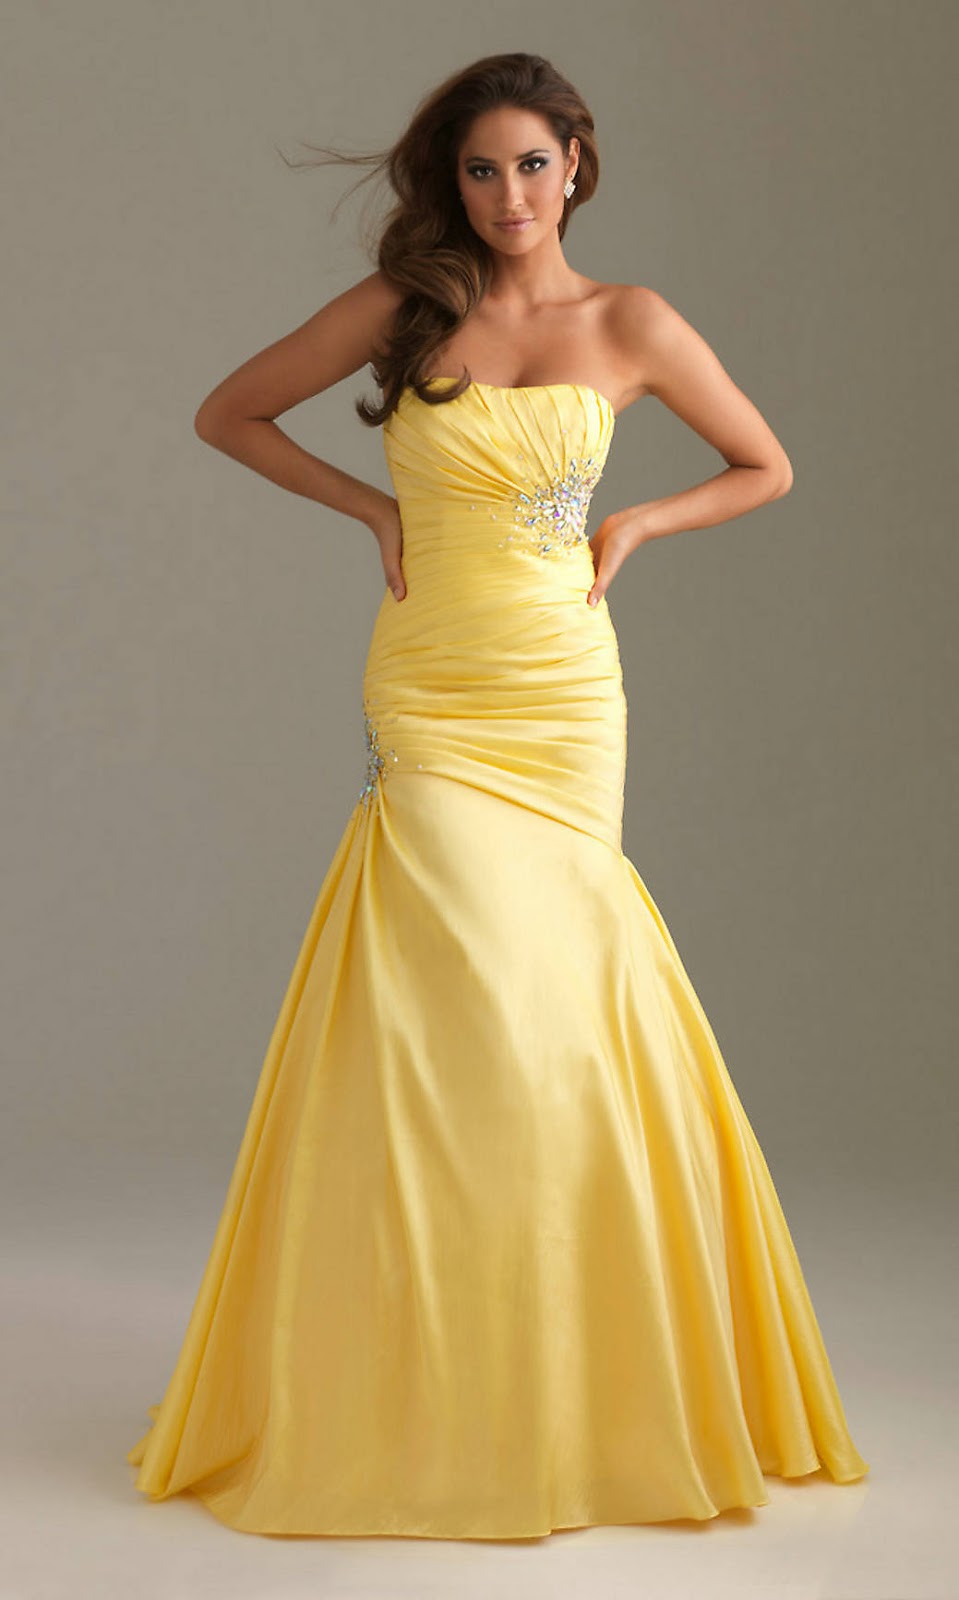 Where To Buy A Yellow Dress & Make Your Life Special